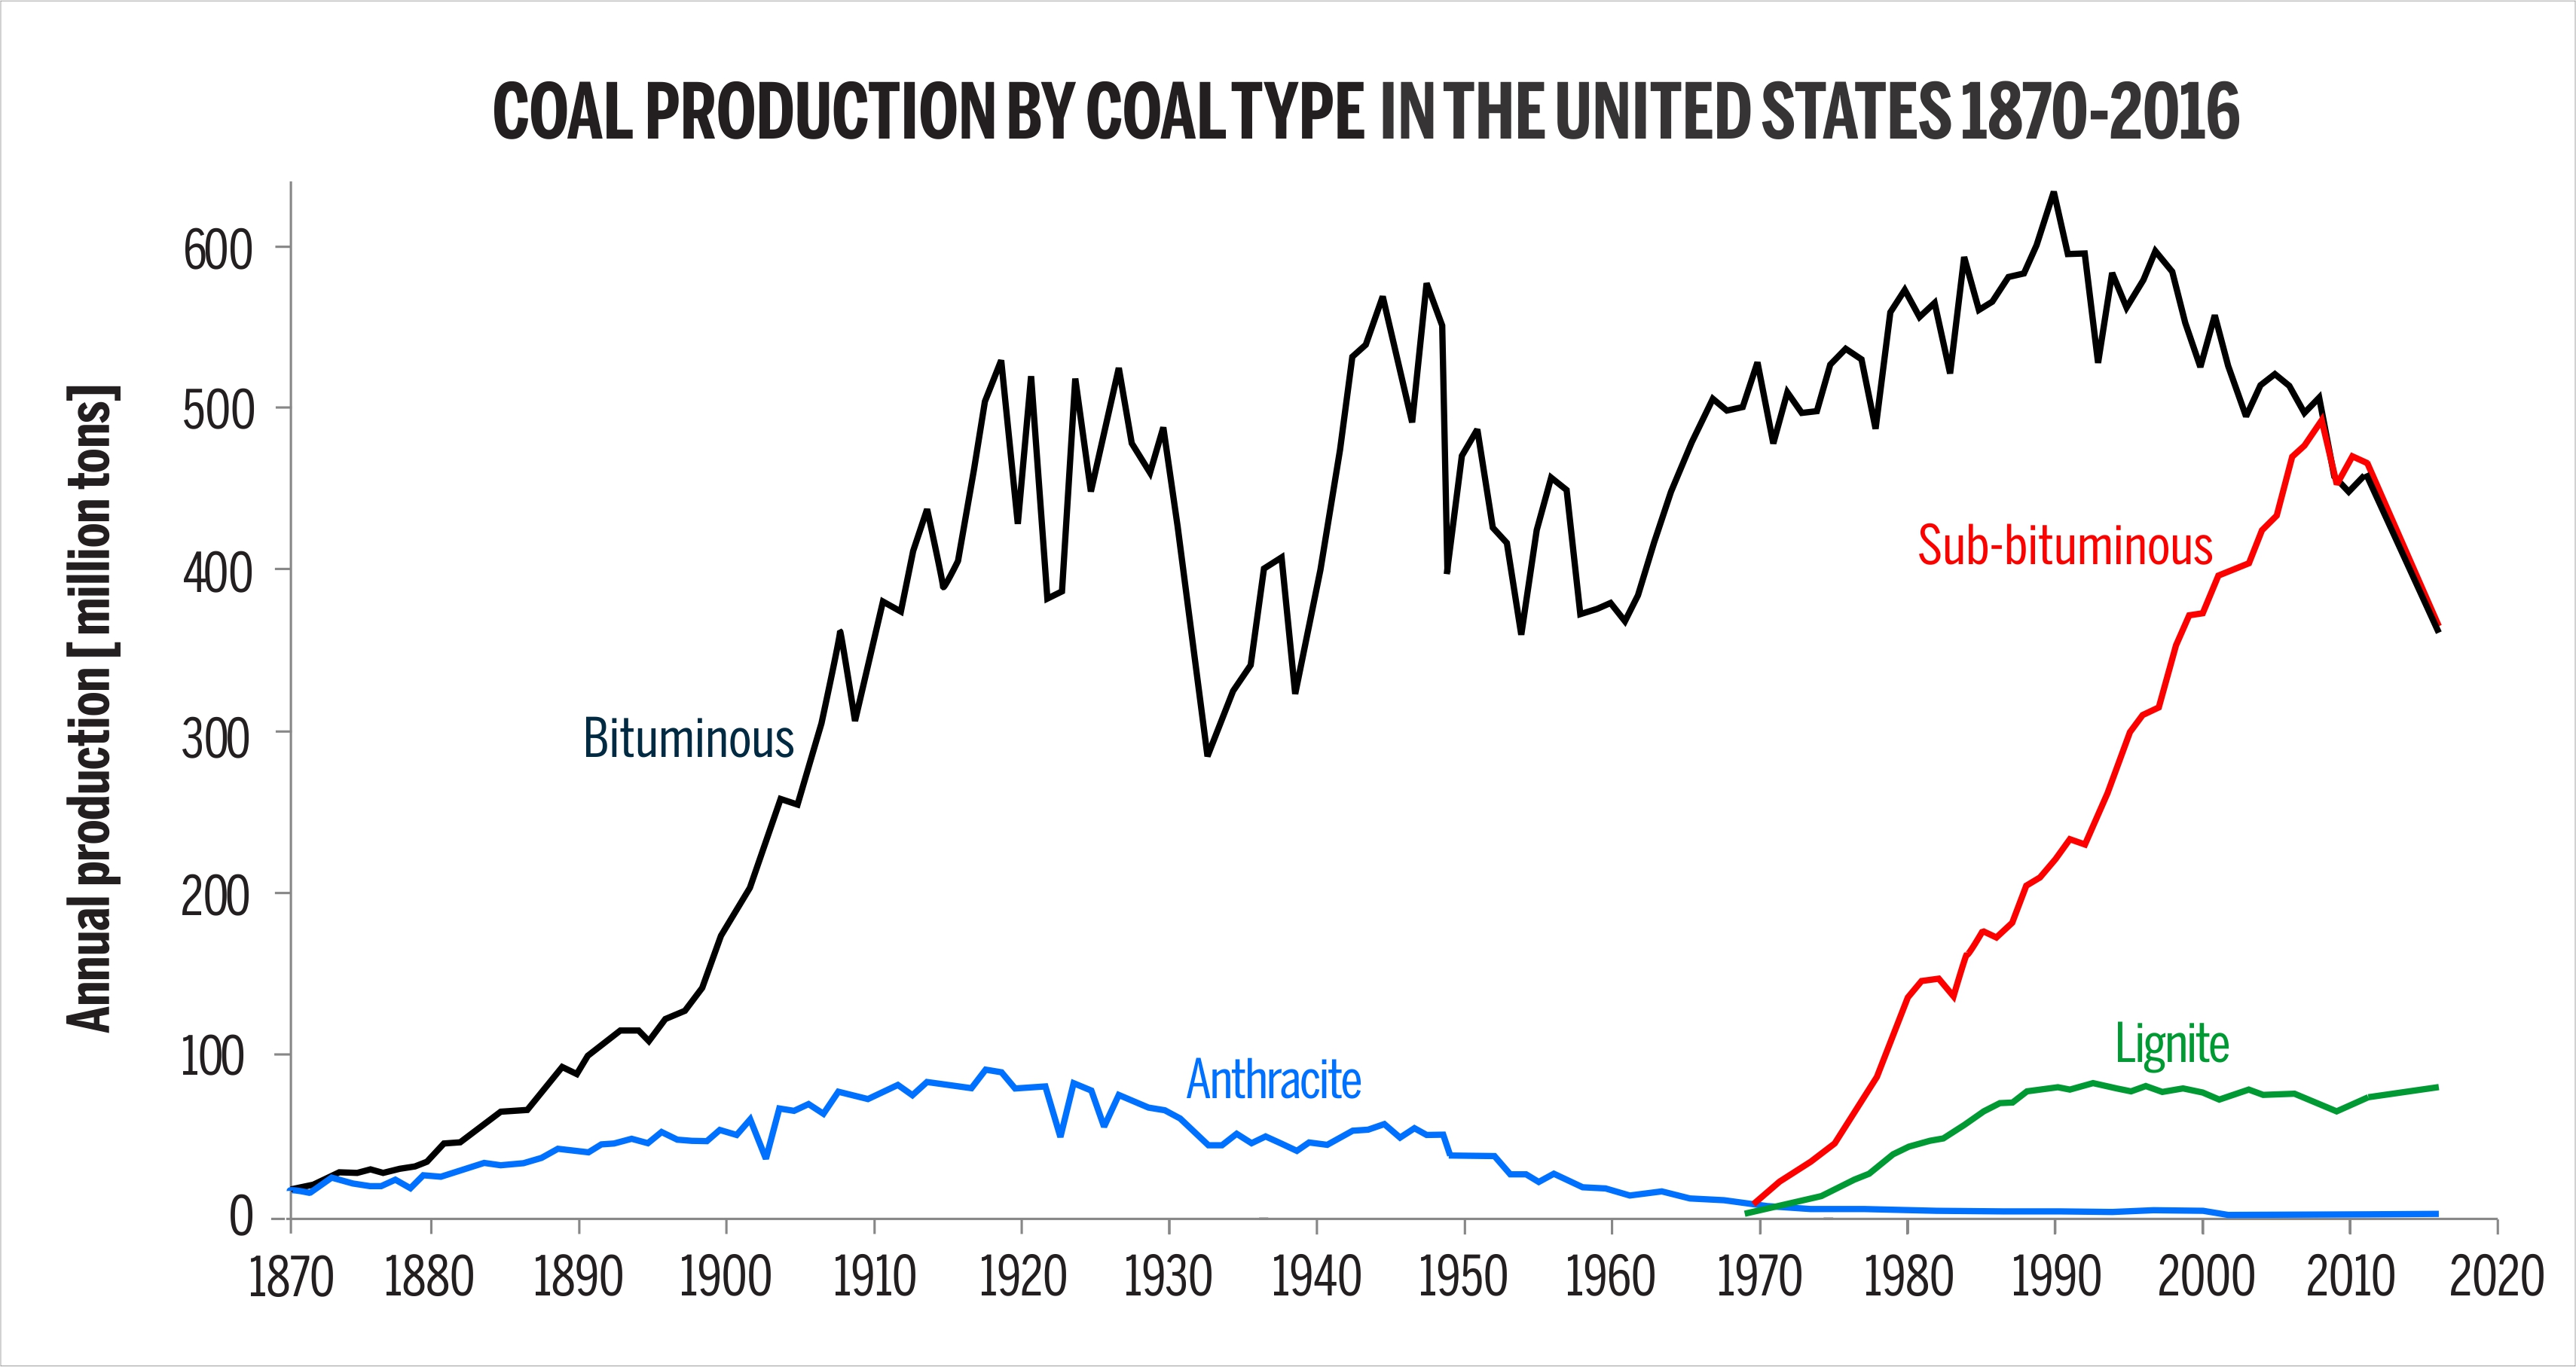 Coal production by coal type in the United States 1870-2016